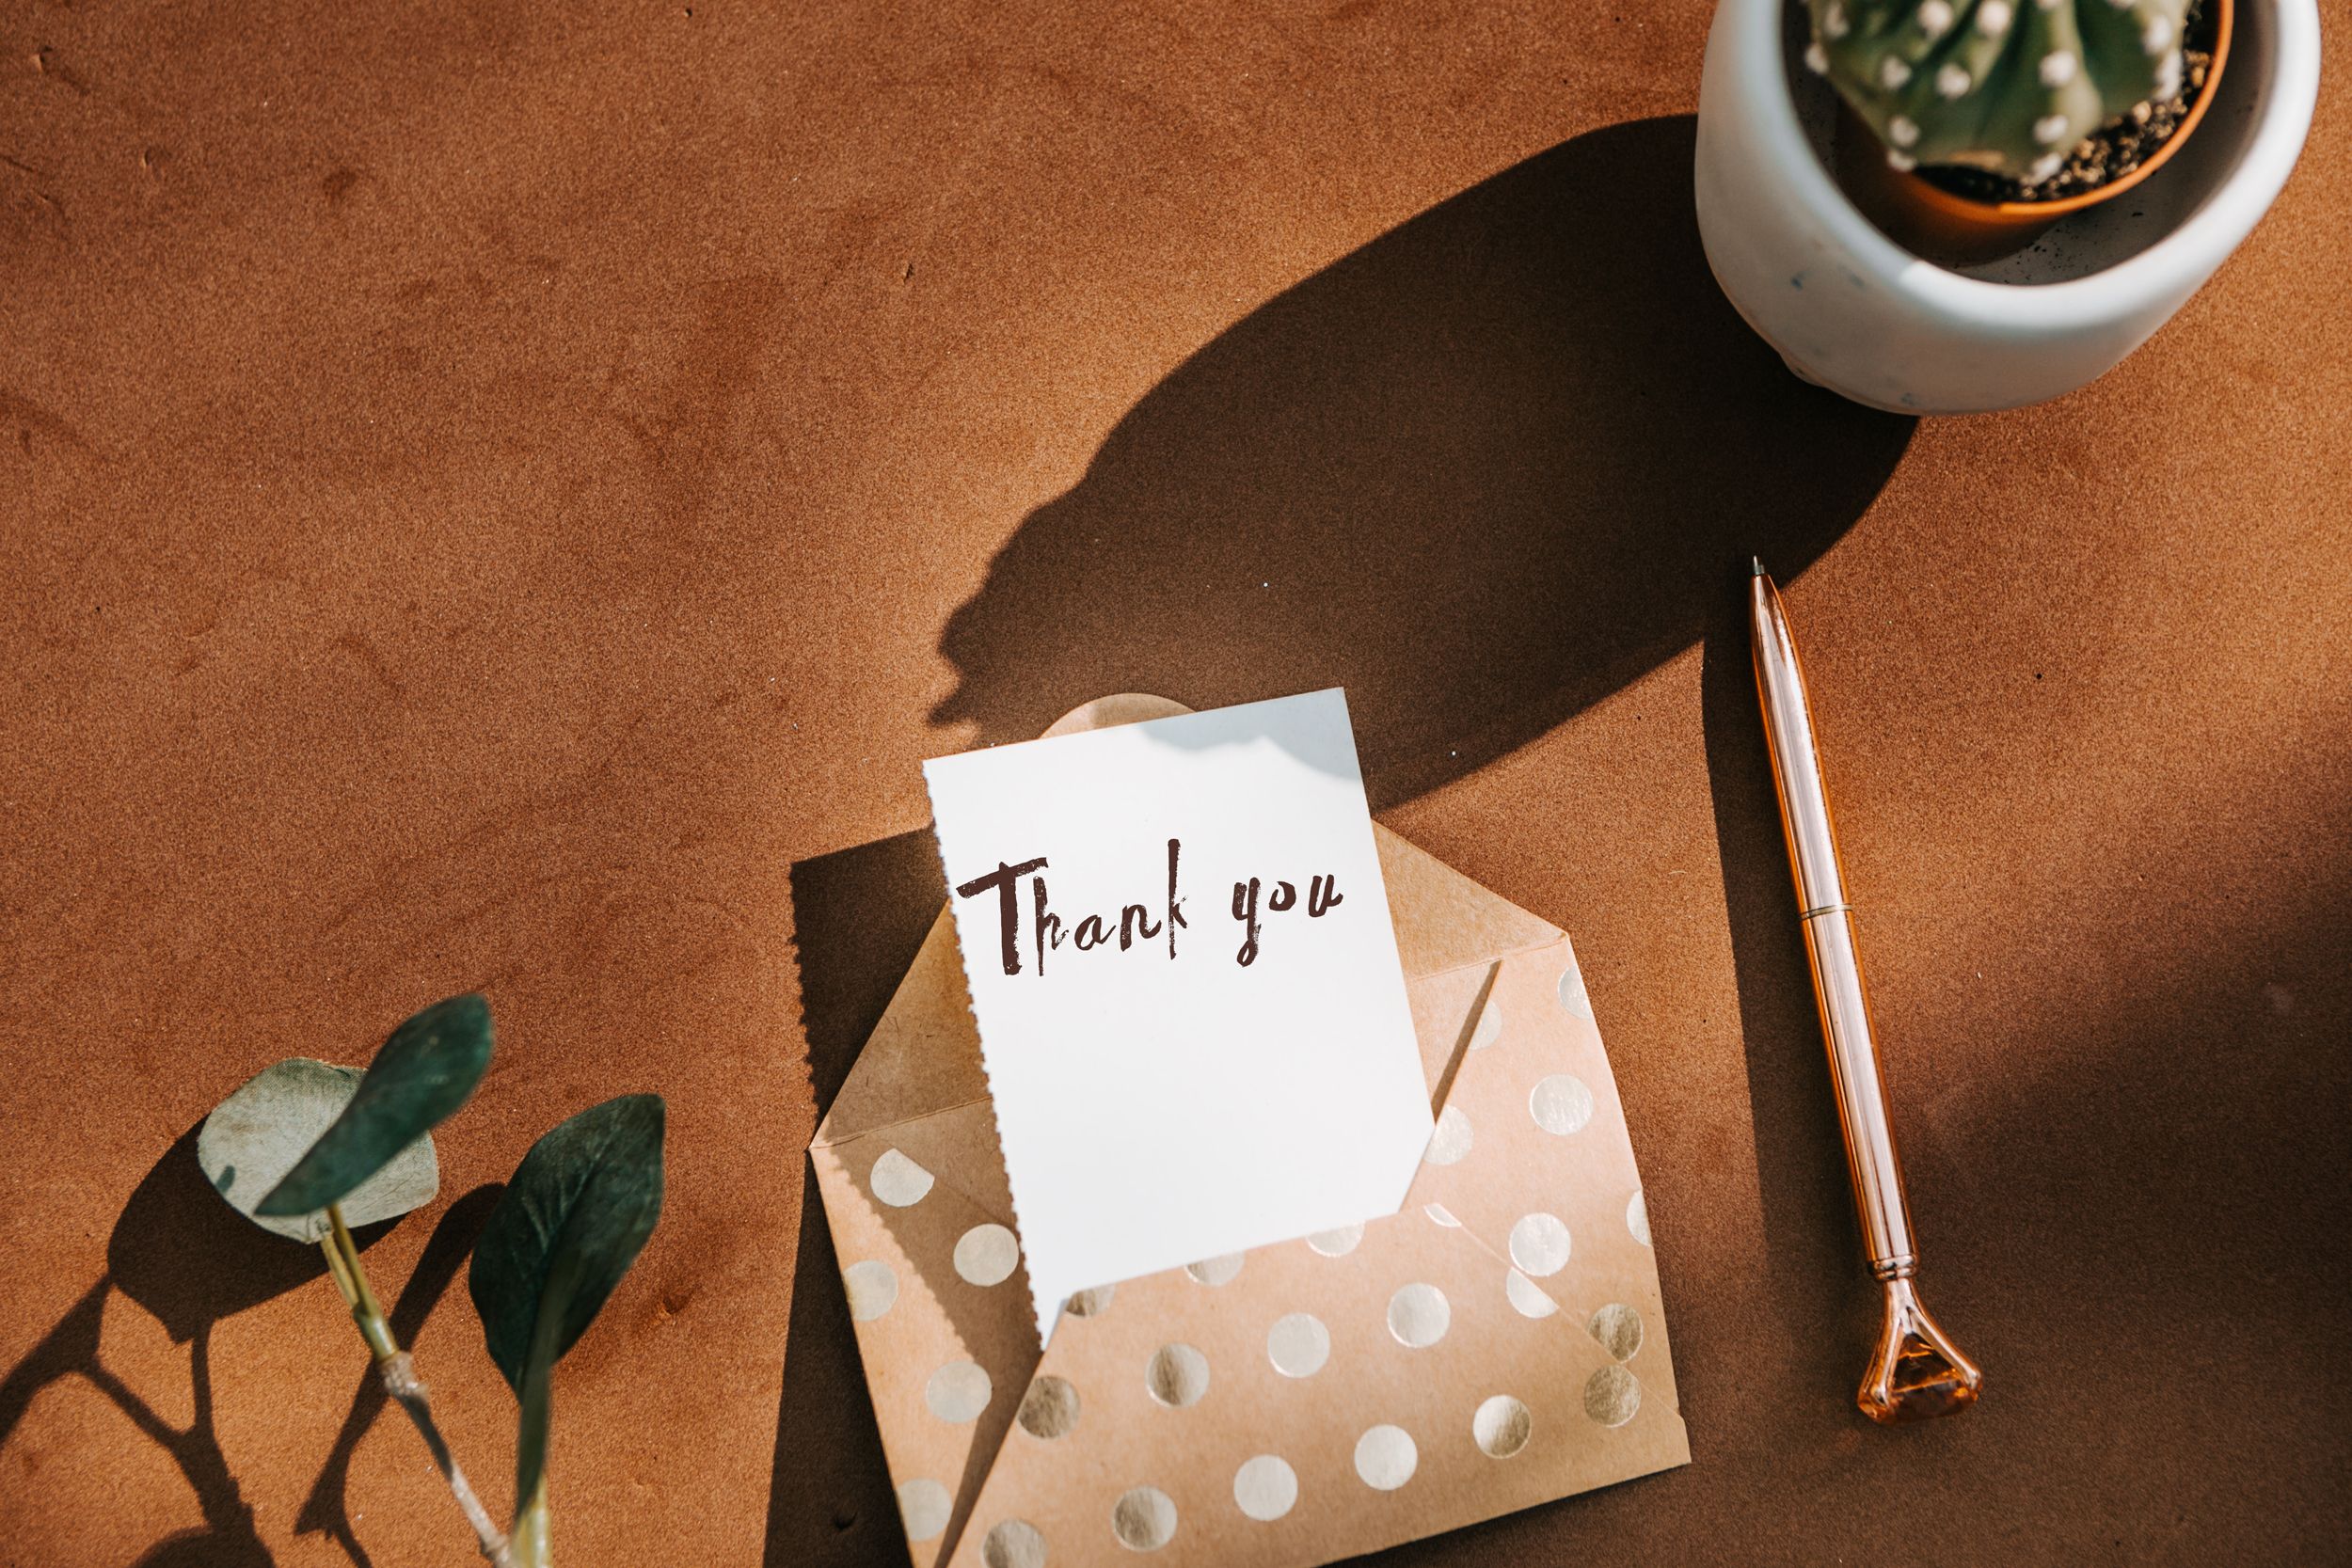 Thank You Card Ideas for Every Priceless Gift - STATIONERS